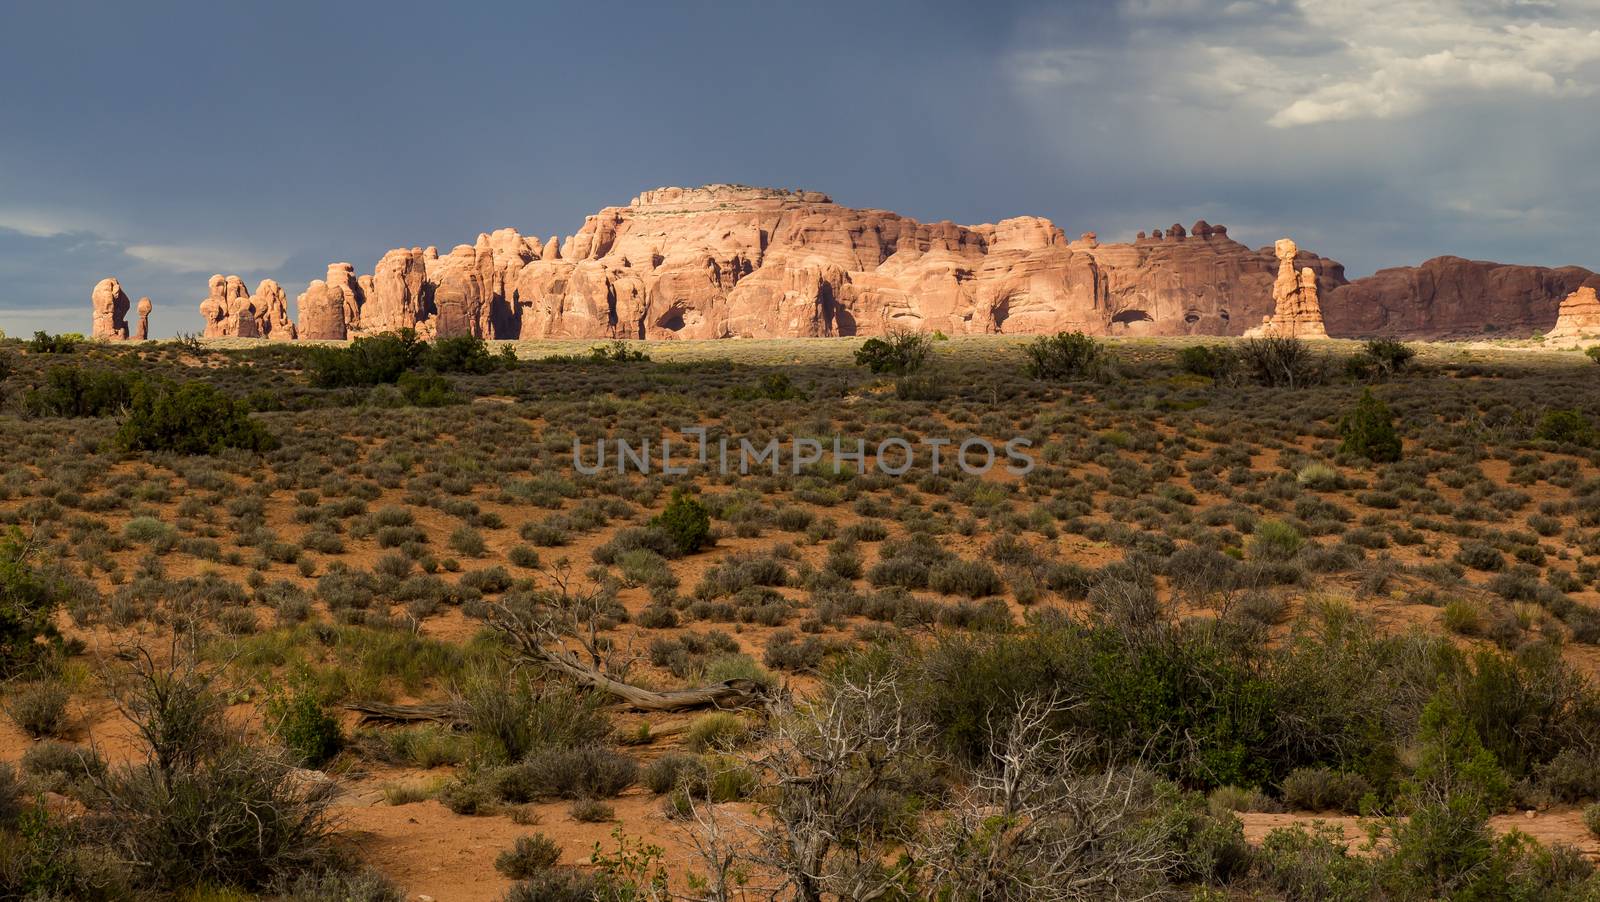 Rock formations, mittens, pillars and examples of erosion and weathering can all be found in Arches National Park, Utah.